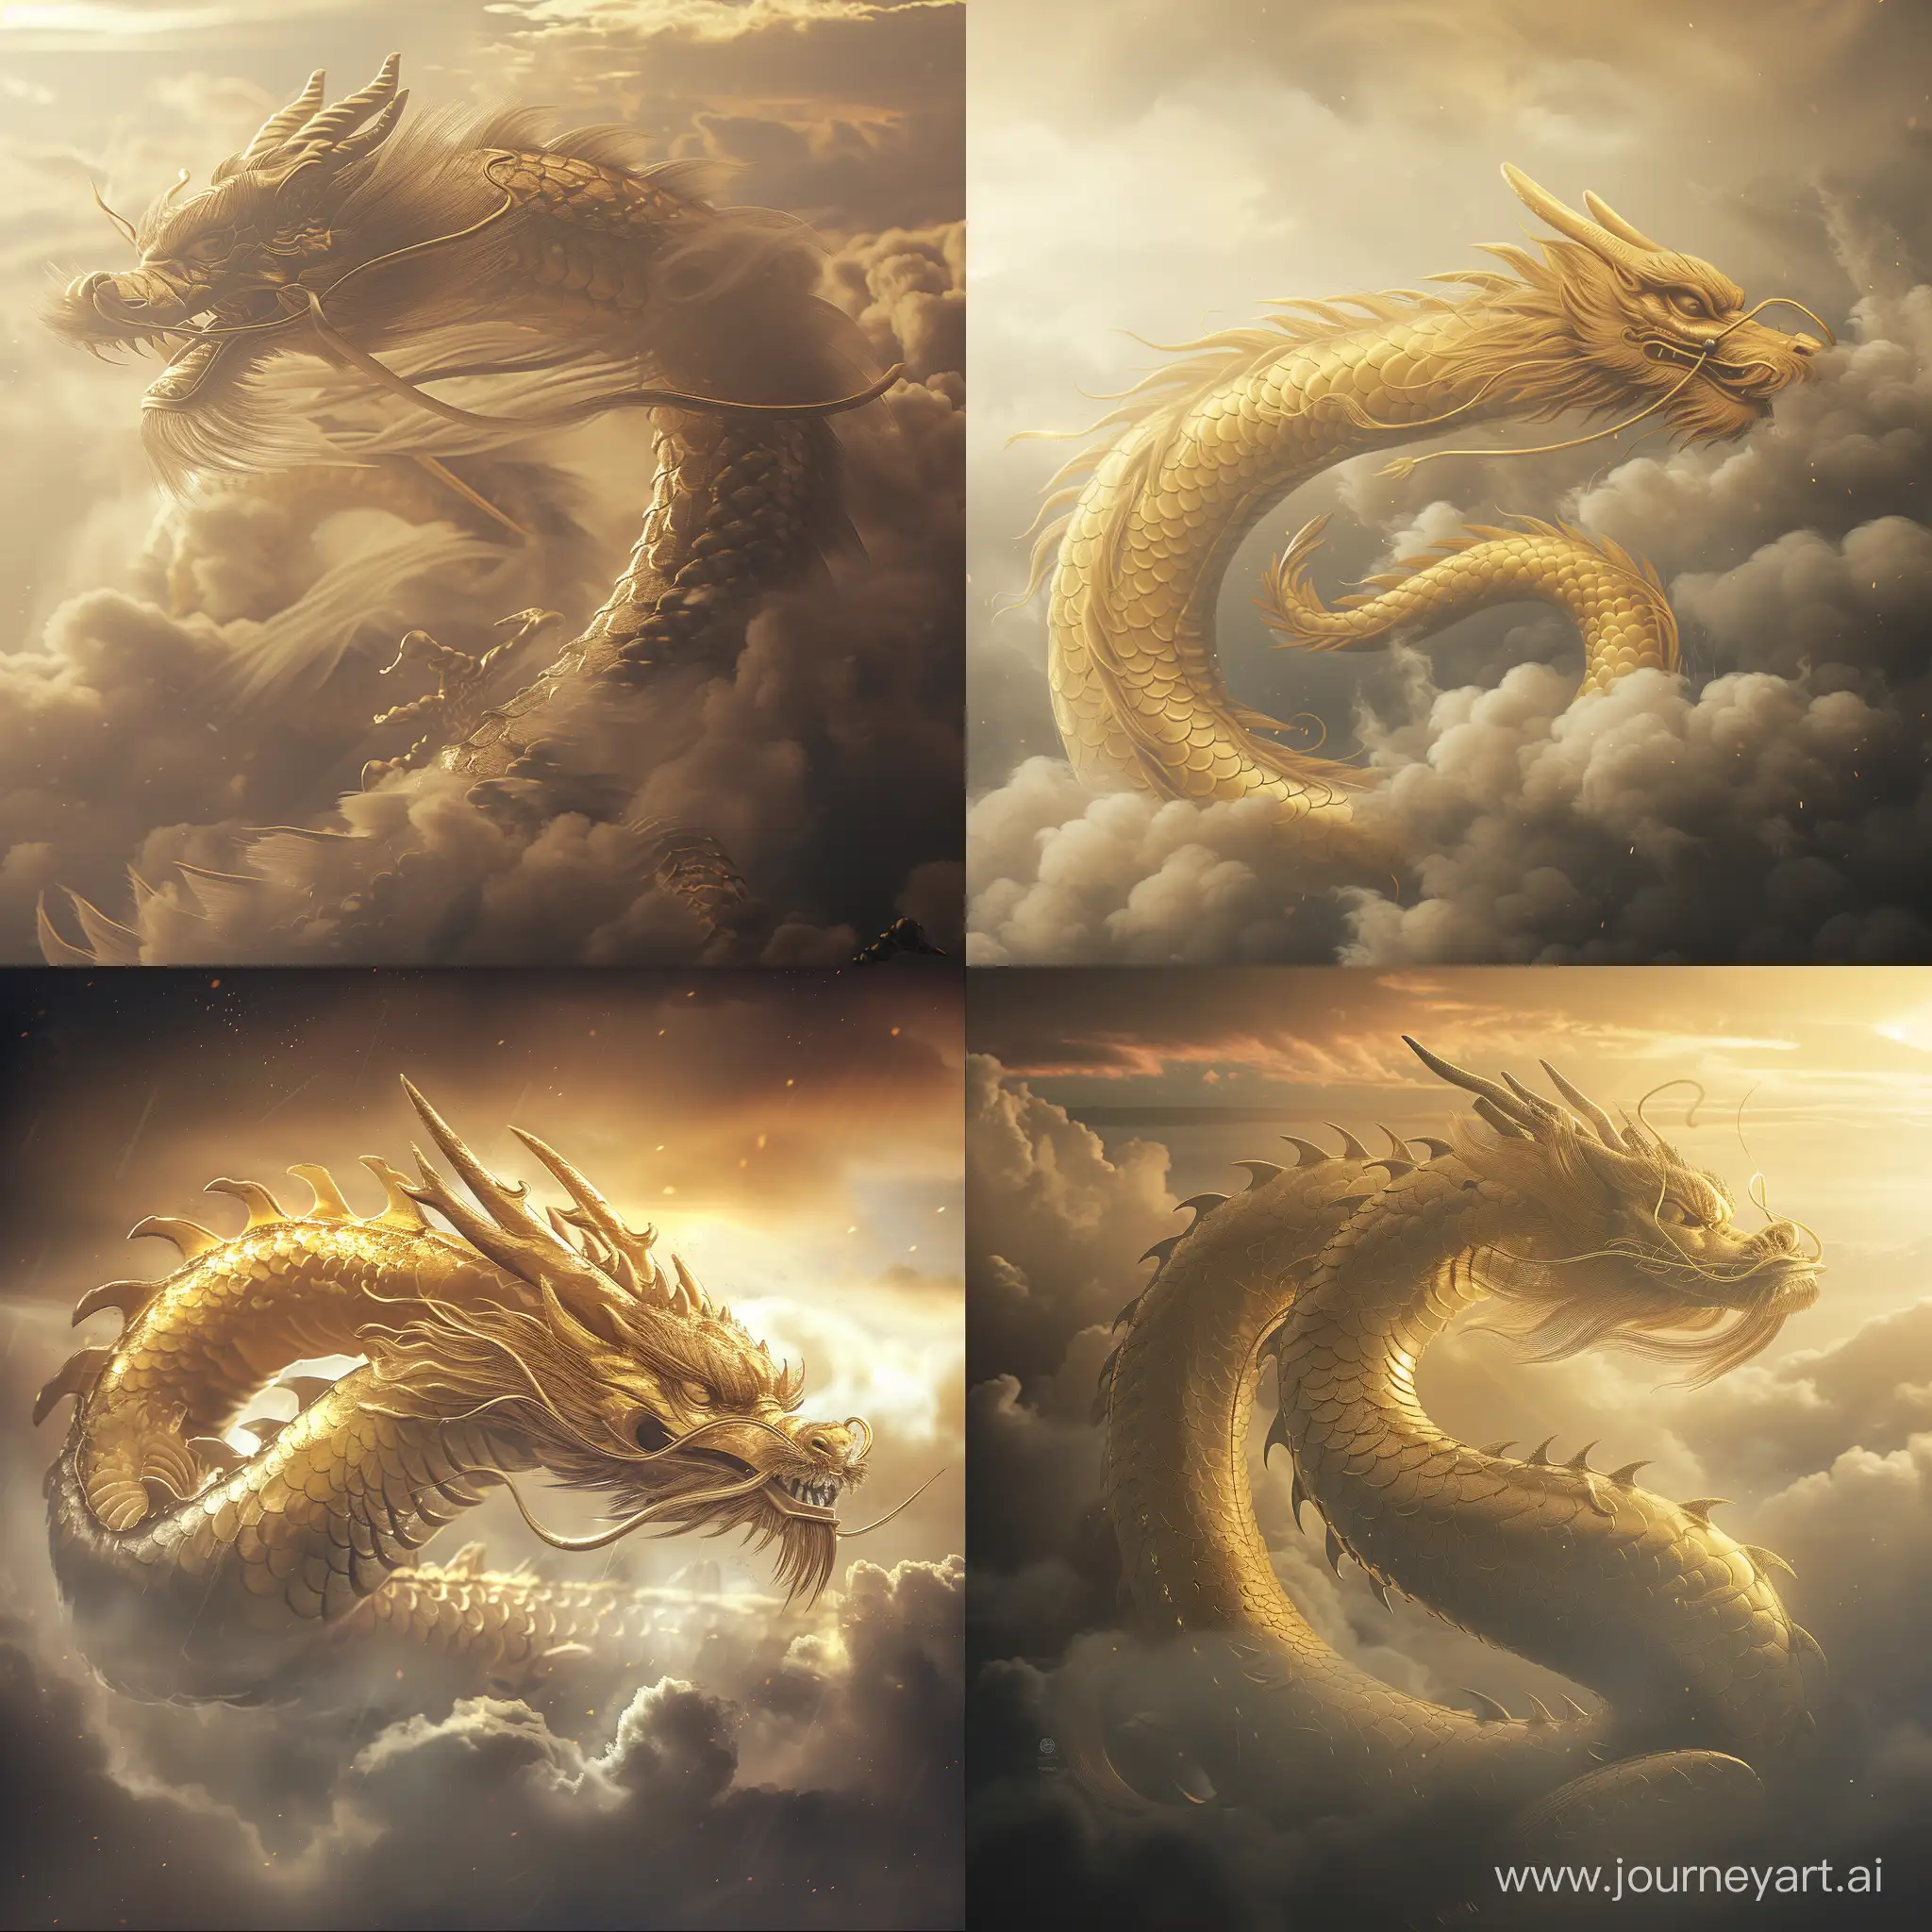 Majestic-Chinese-Dragon-Soaring-Amidst-Clouds-Exquisite-8K-Art-Inspired-by-Ma-Yuan-and-Jeremy-Zhuang